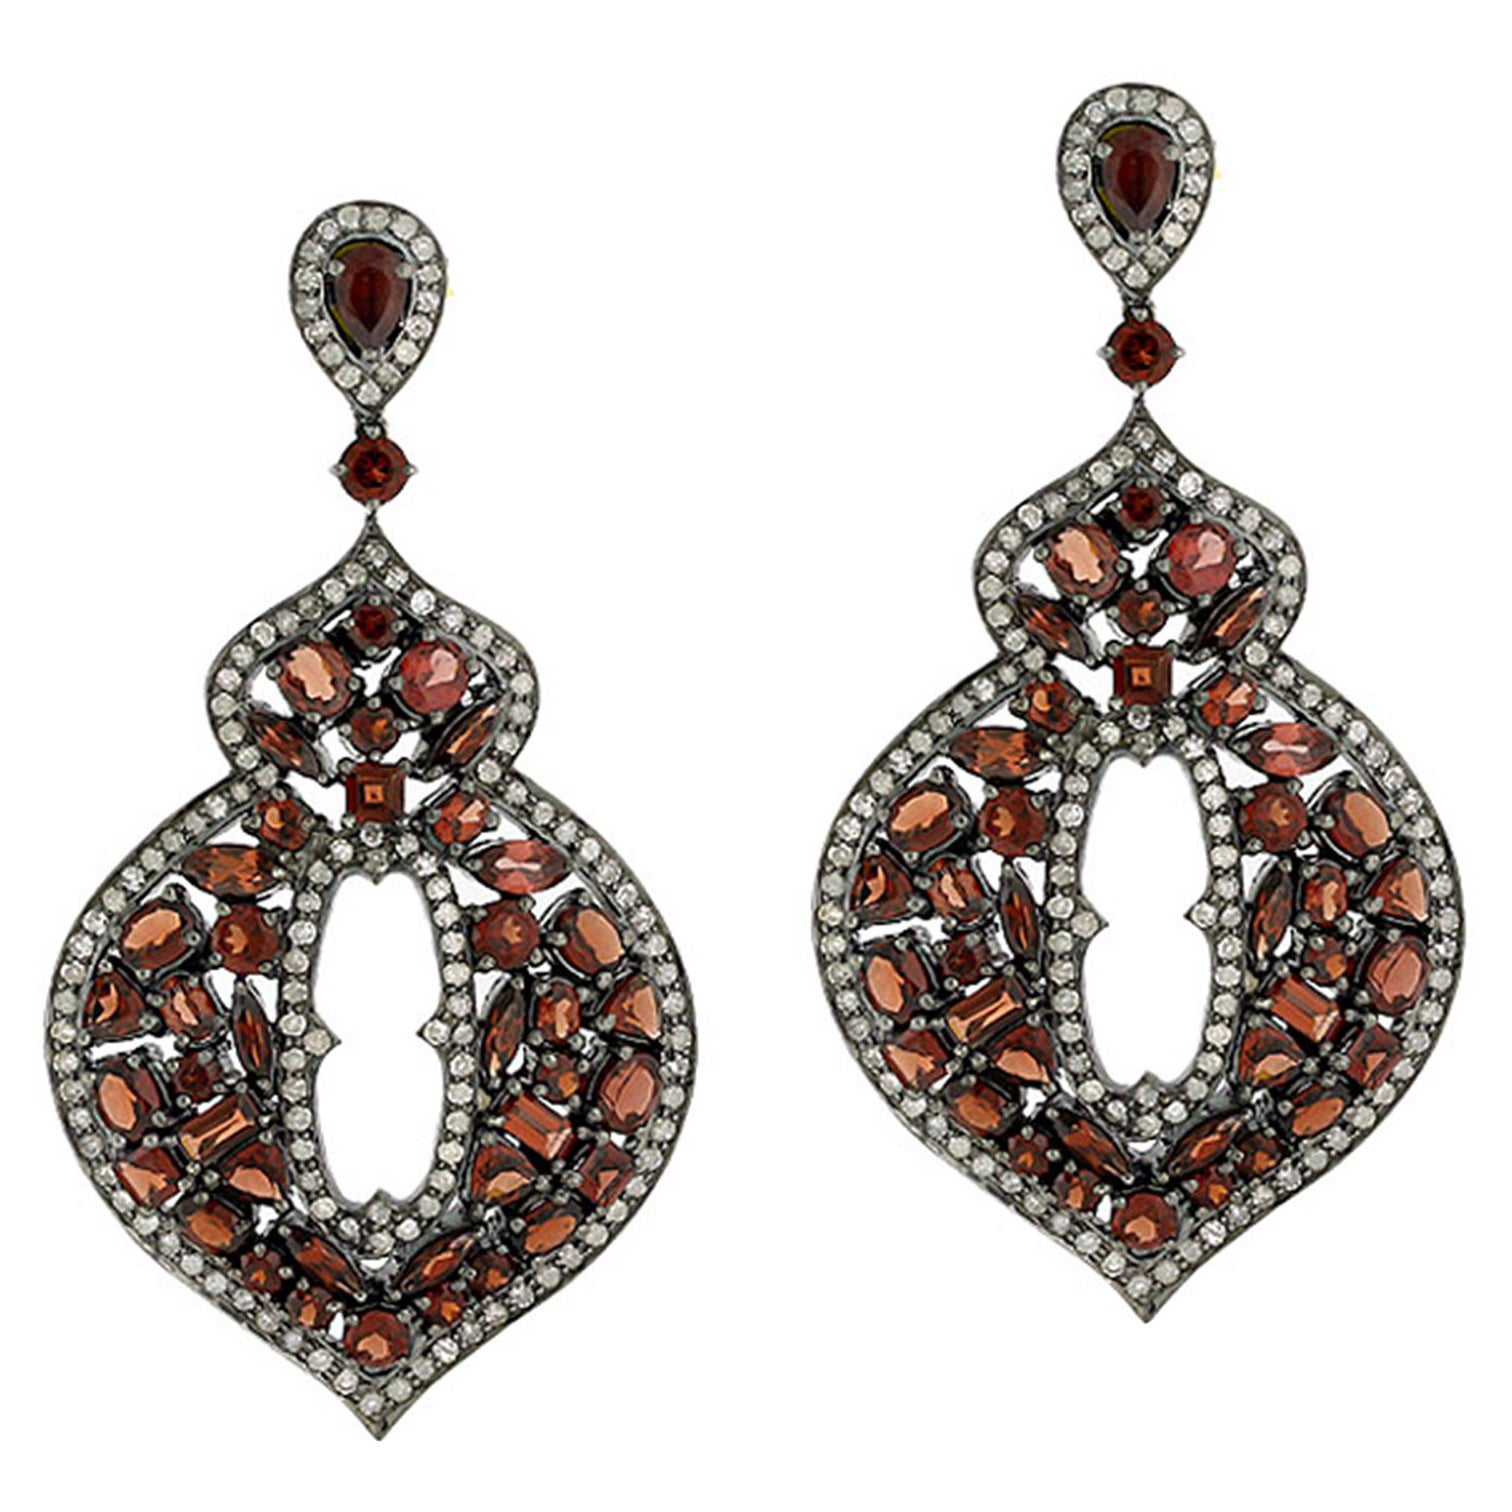 Mixed Shaped Red Garnet Earrings Adorned with Diamonds In 18k Gold & Silver